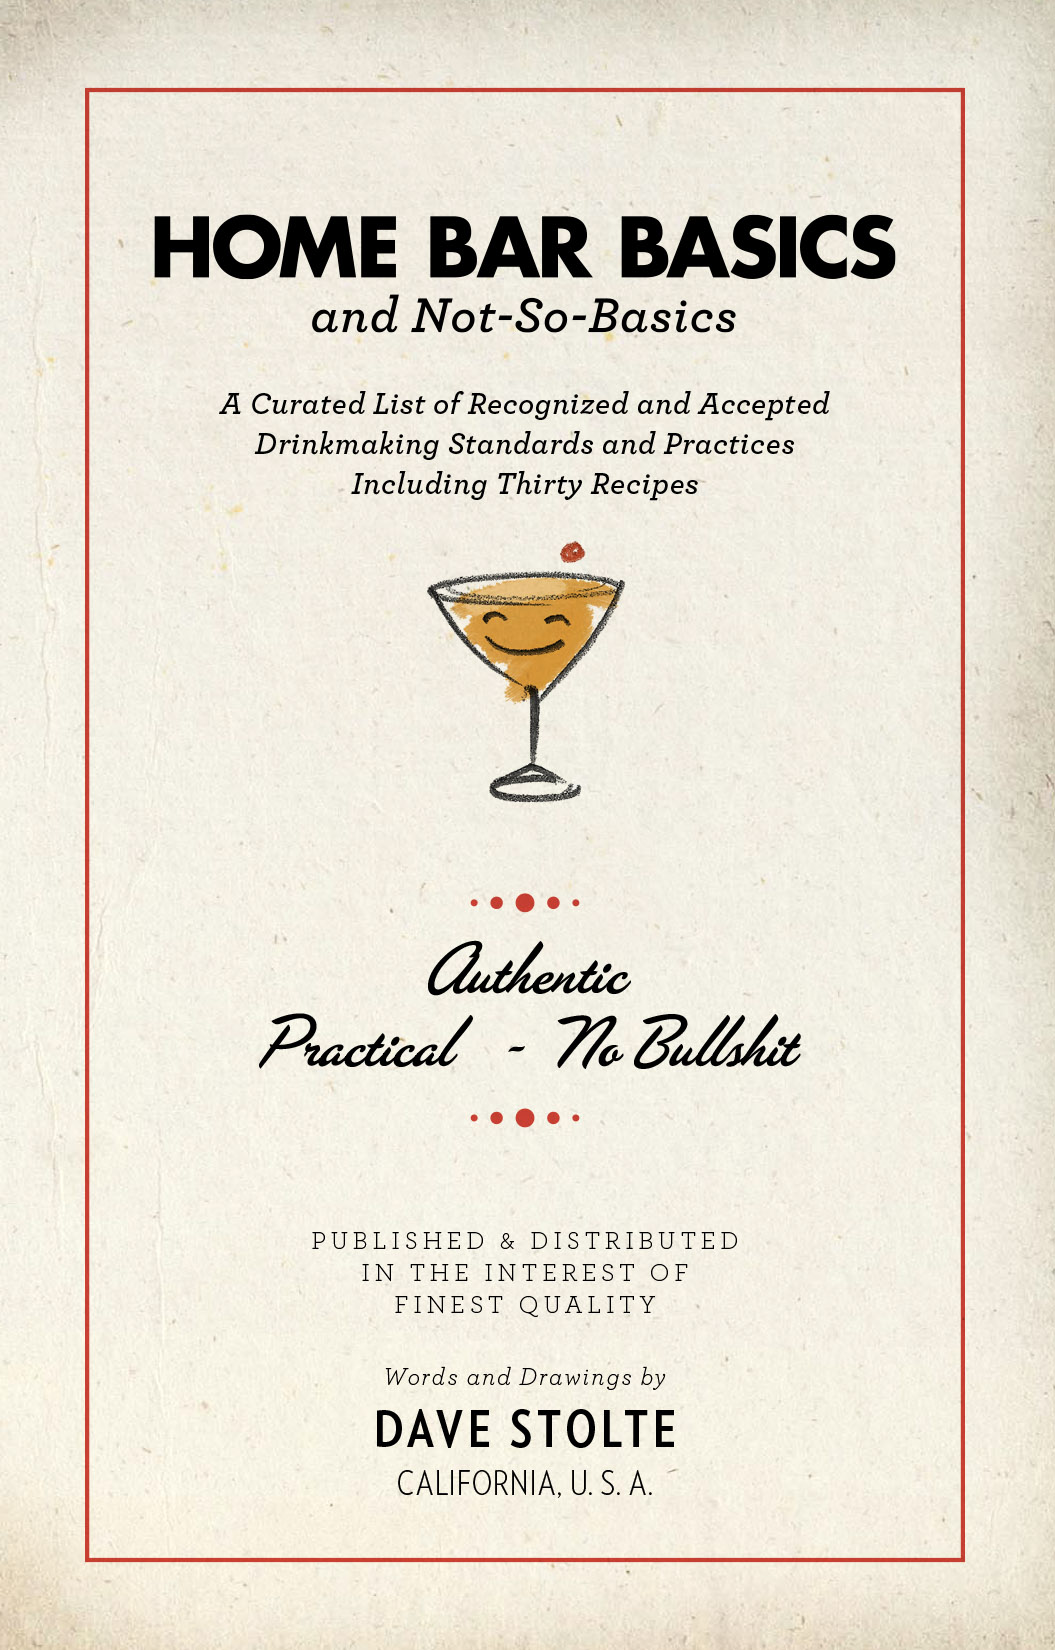 Home Bar Basics (and Not-So-Basics) 2nd Edition by Dave Stolte